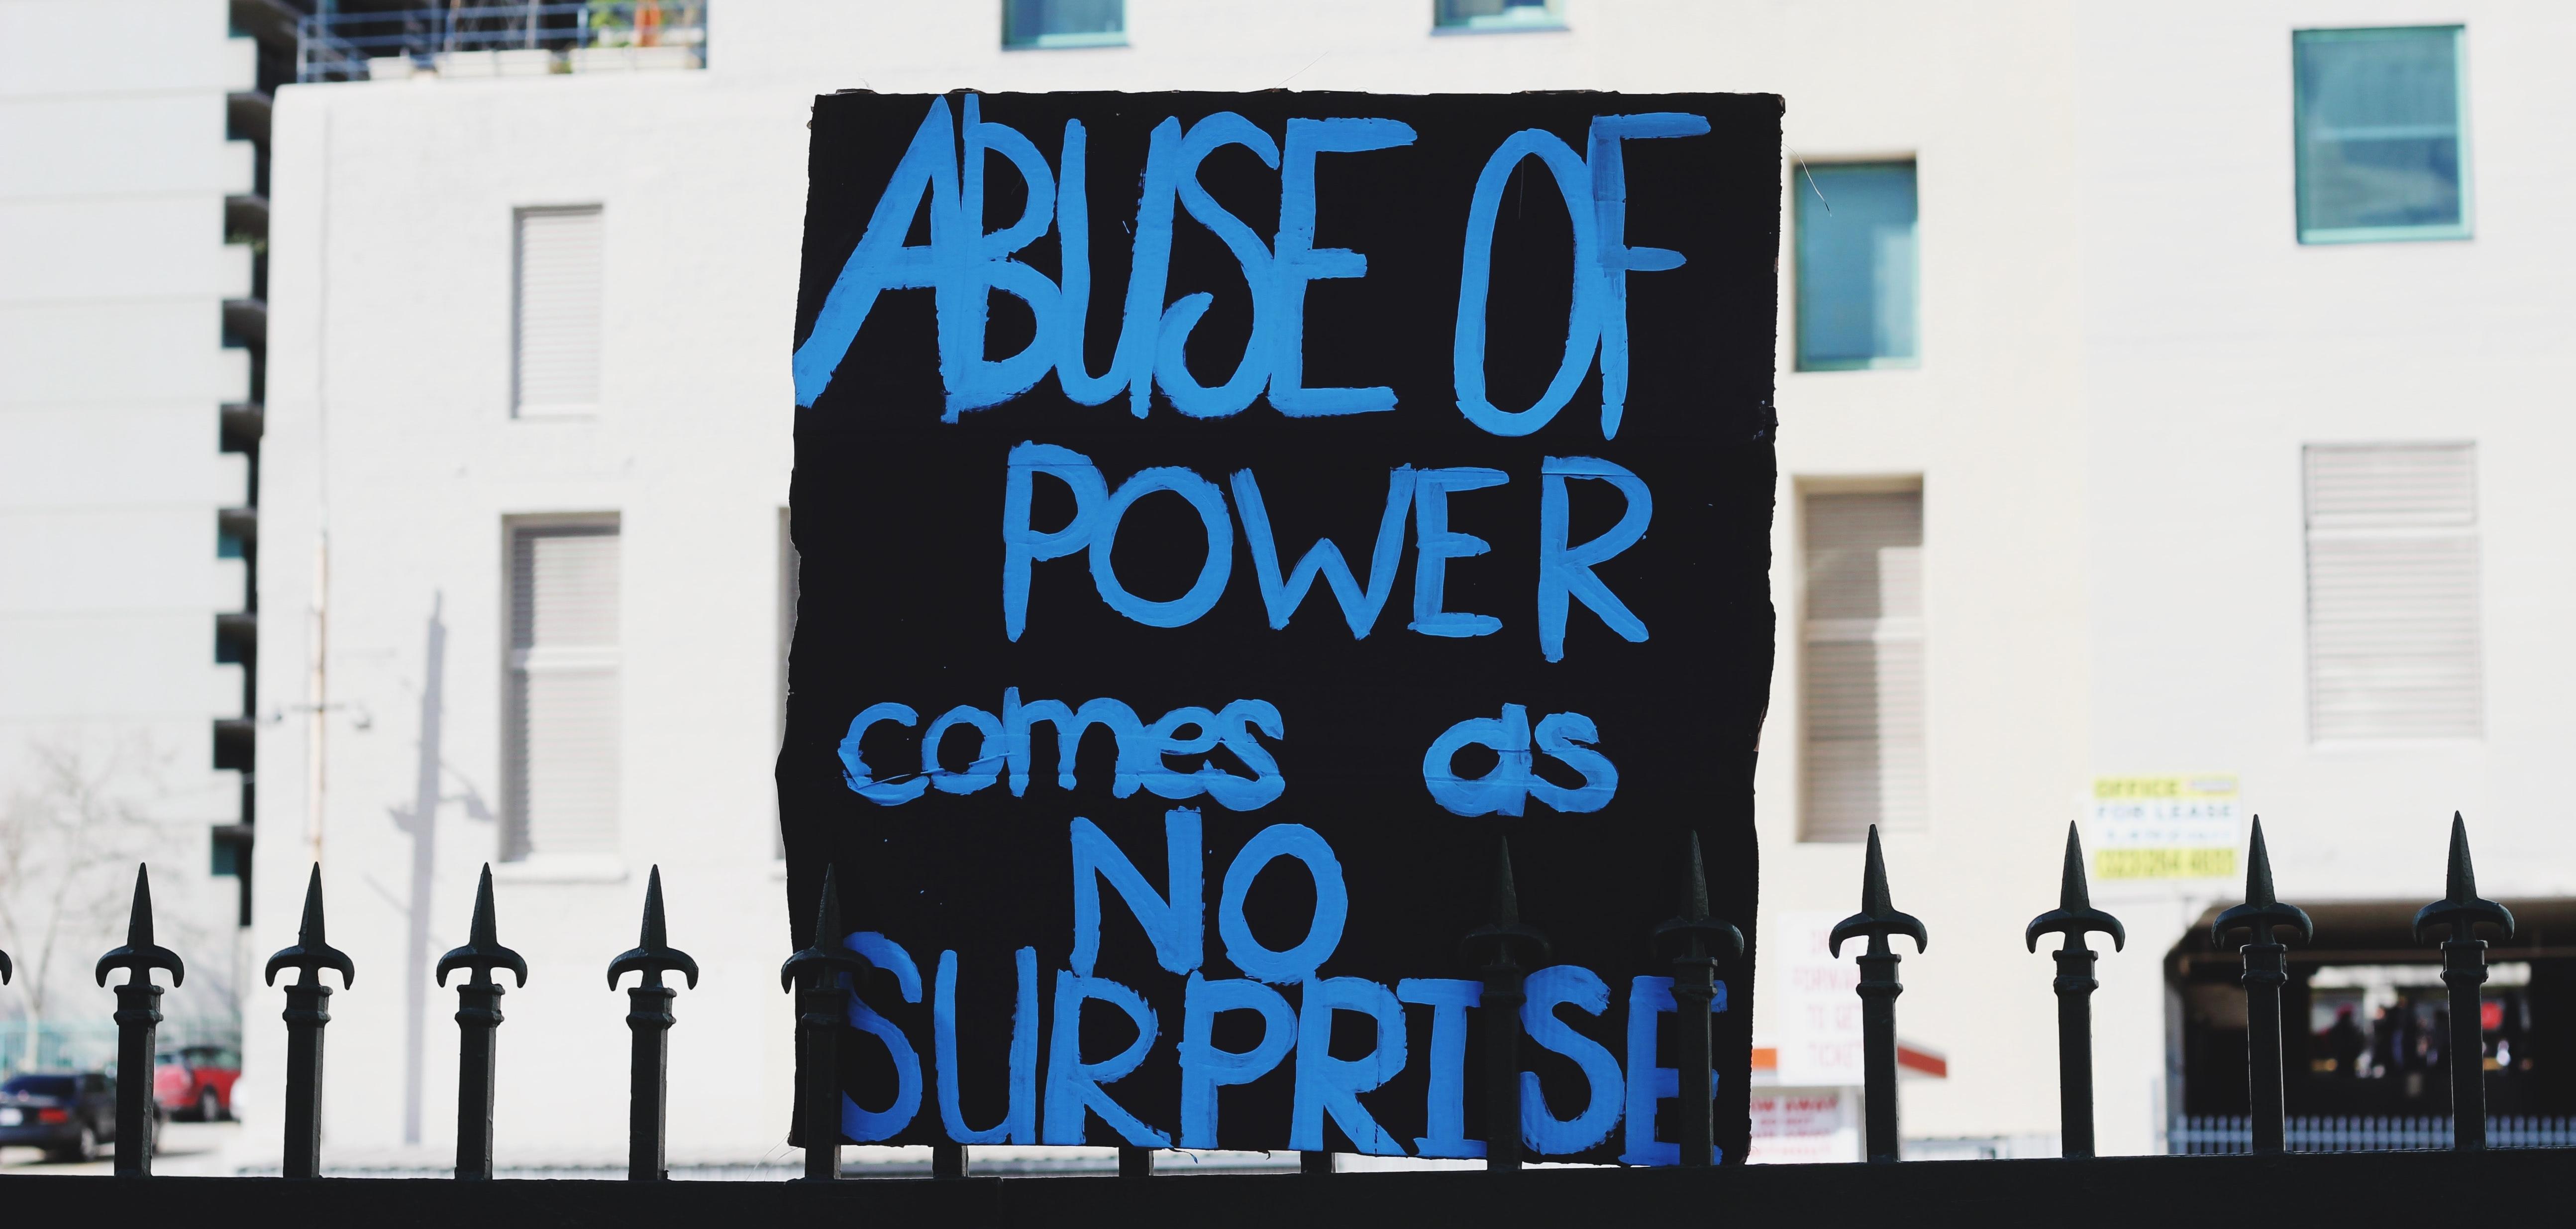 A black sign that says "Abuse of power comes as no surprise."